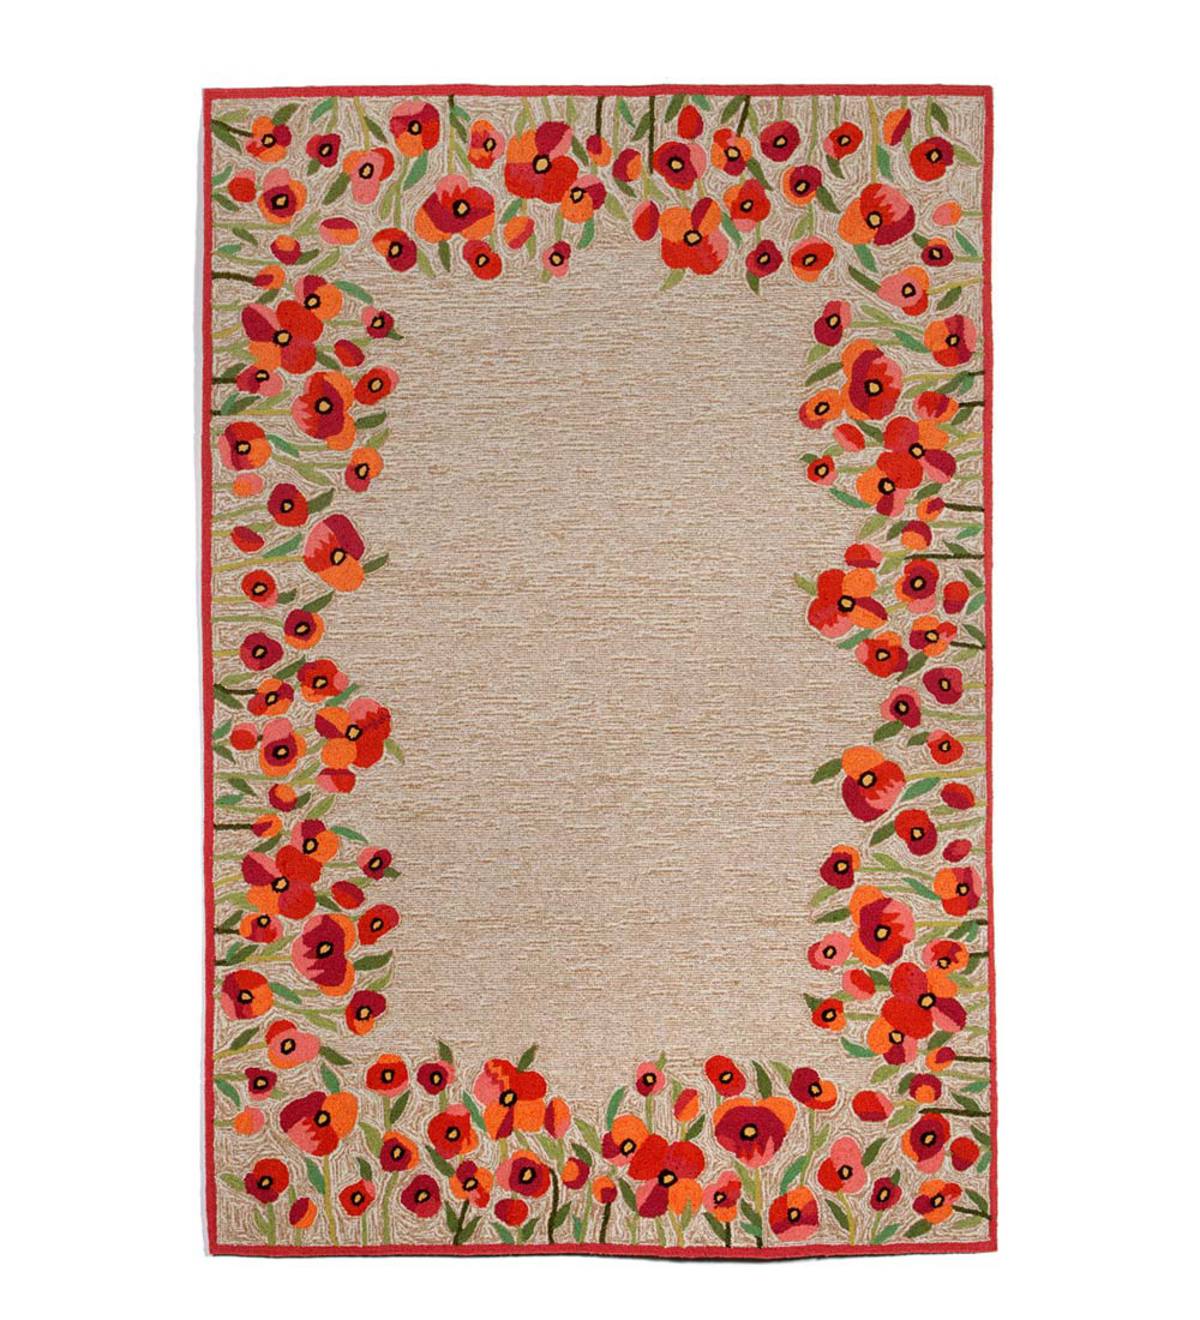 Red Poppies Border Accent Rug, 8'3"W x 11'6"L - Red